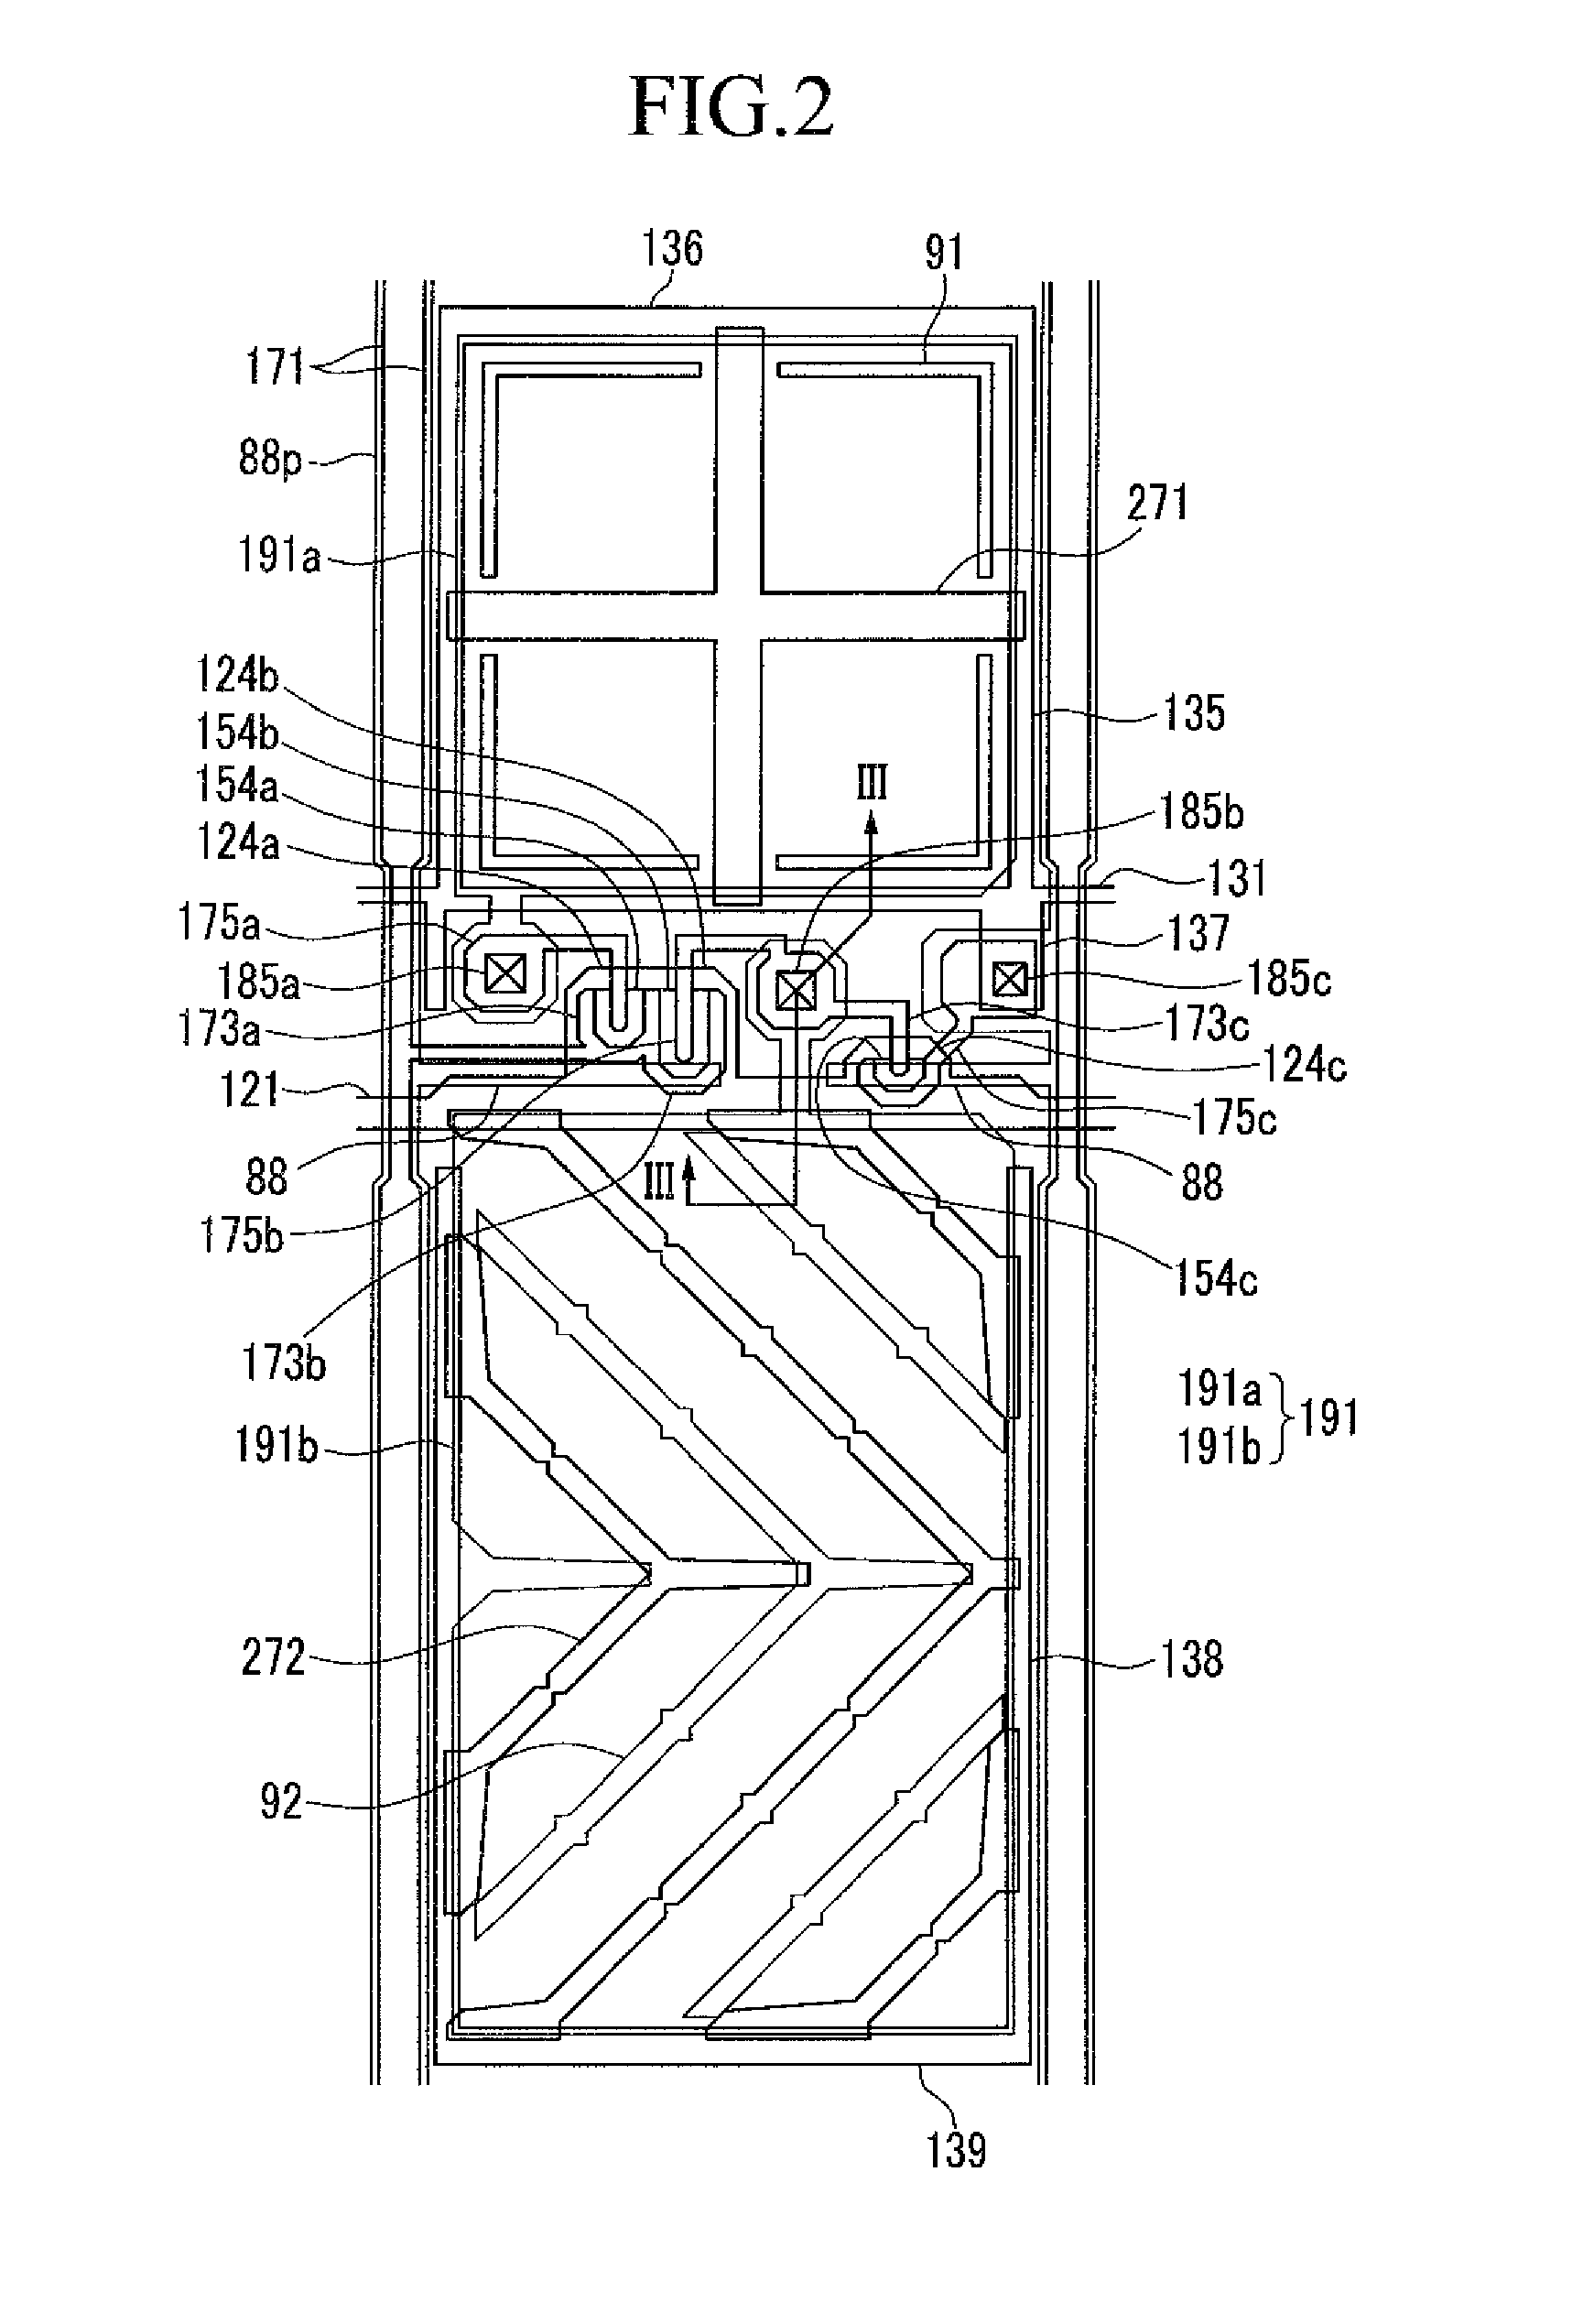 Liquid crystal display having reduced image quality deterioration and an improved viewing angle, and a method of driving the same